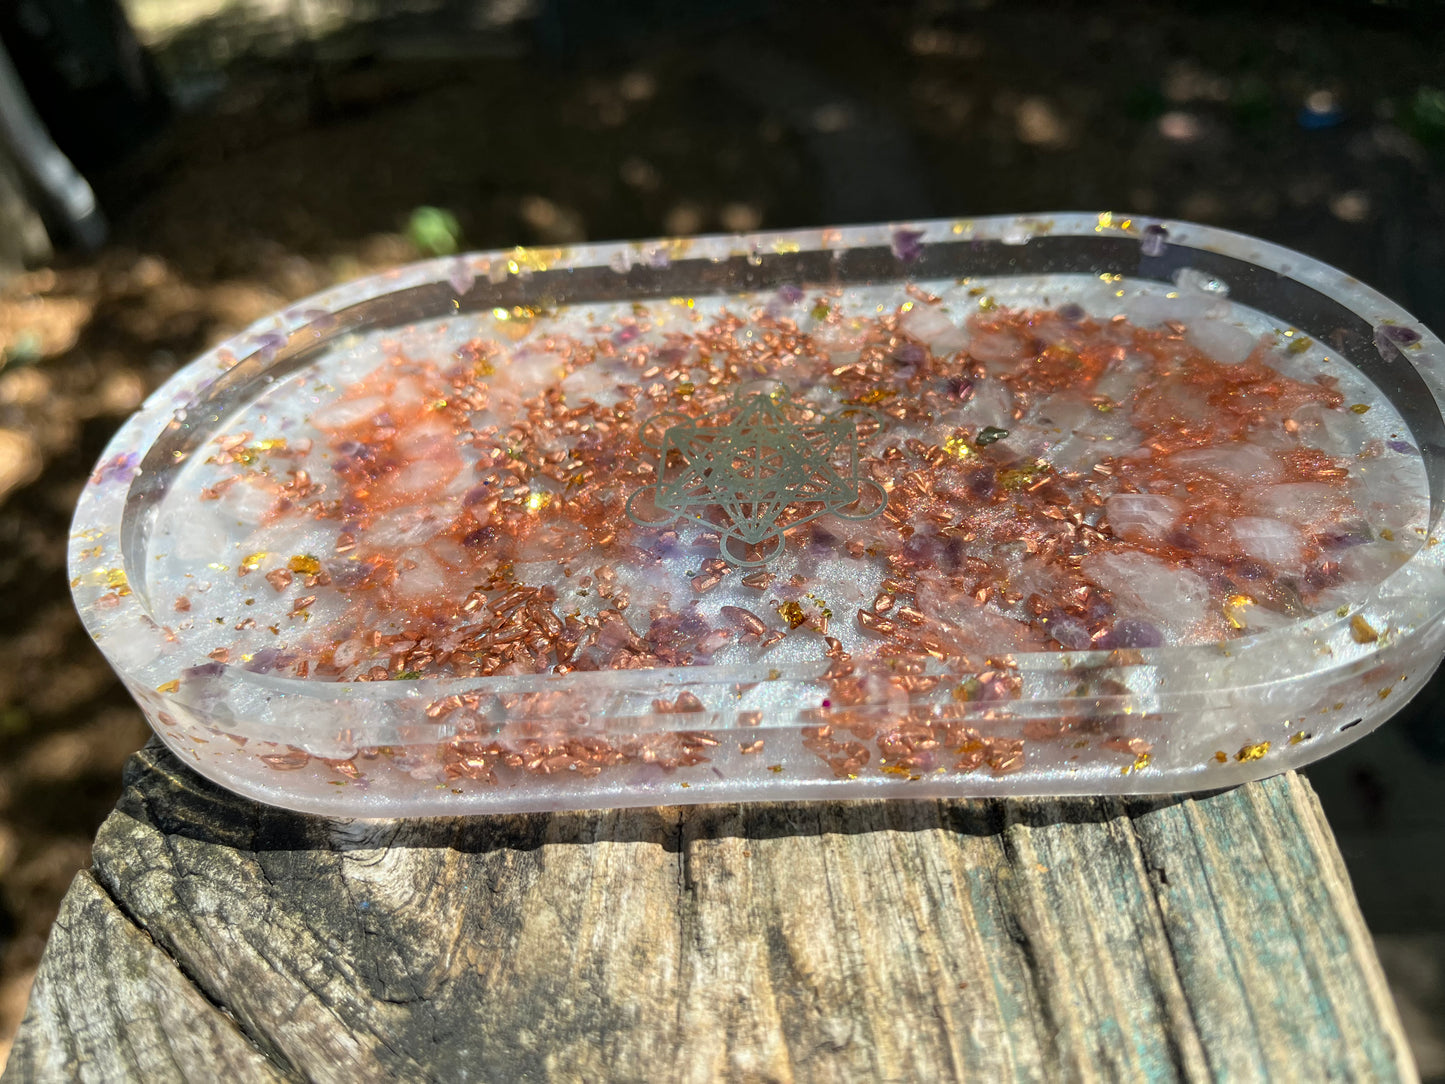 Orgonite Amethyst, Clear Quartz, Metal Shavings Resin Trinket Crystals Jewelry Arts Crafts Money Change Office Supplies Rolling Portable Multi Use Tray